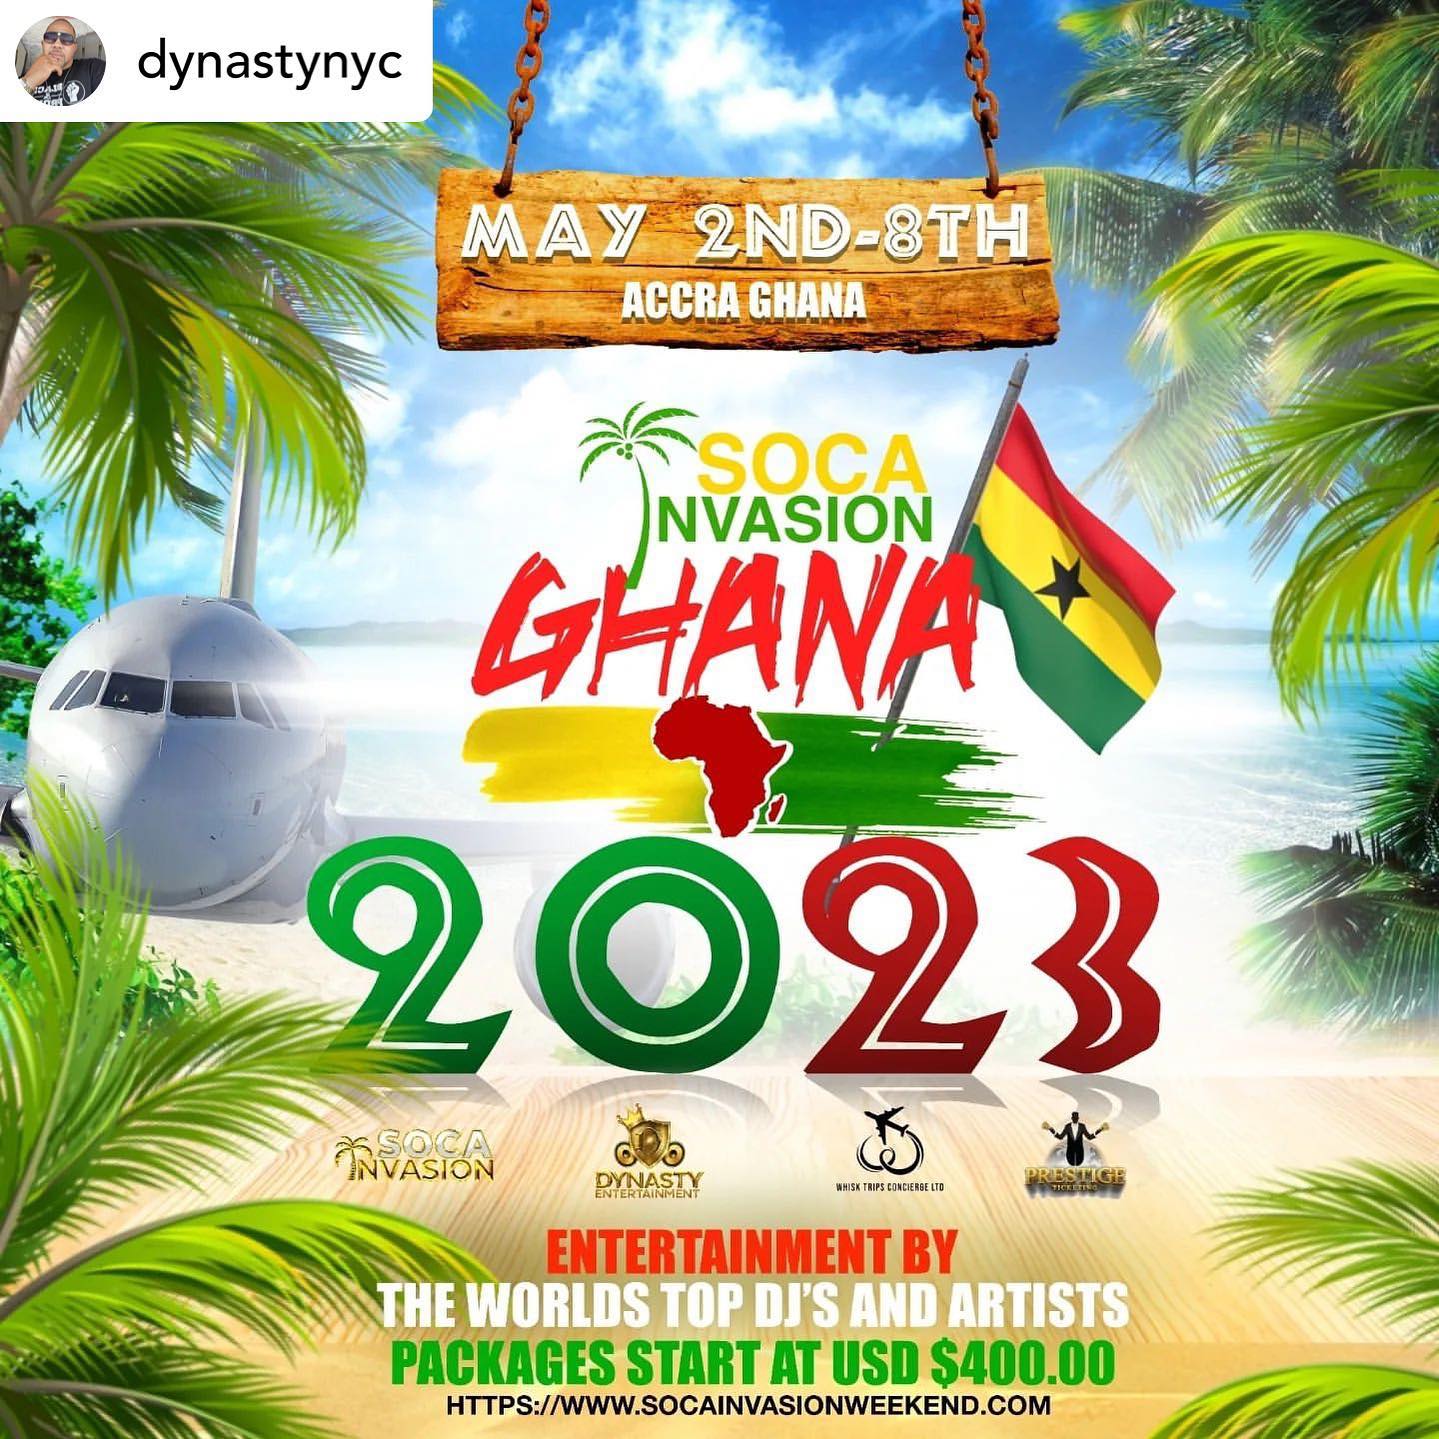 This May We Head Back to Ghana for 6 Days Of Soca Events and Tours!.

Joins us 
🖥 Www.socainvasionweekend.com 
️ 3473857568 for more information 

Music by the World's top Soca and Afrobeats Djs 

Registration closing Soon!
Jouvert - Glow - Roof Top - Pool Party